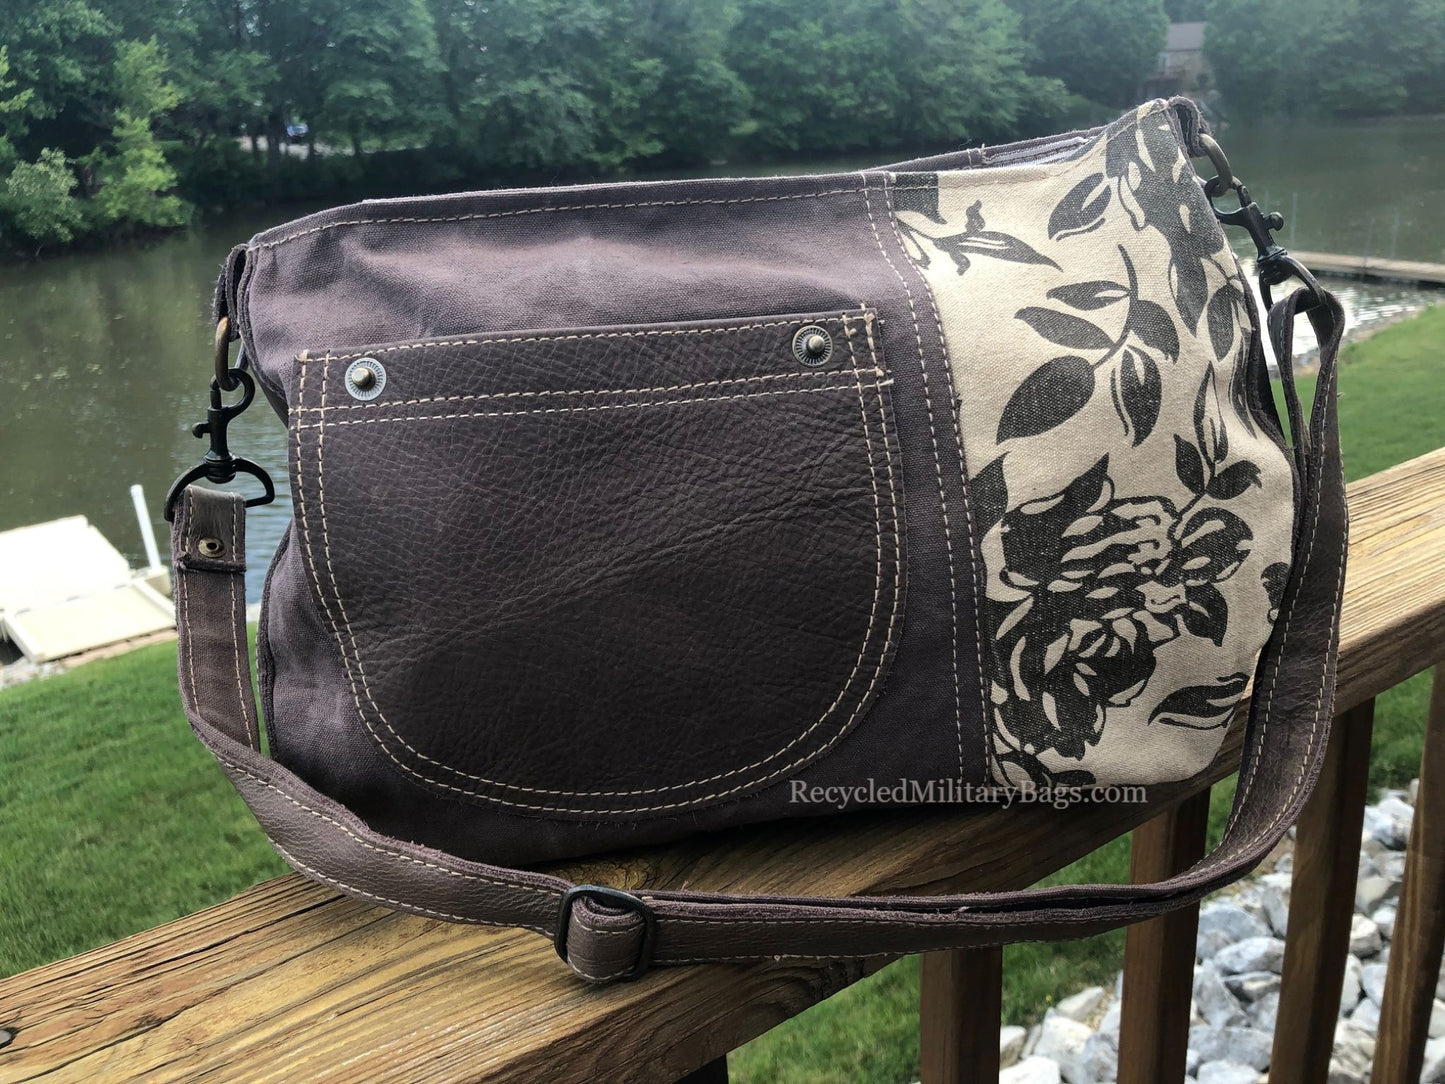 Brown Floral Sustainable Canvas Purse with Leather Accents Shoulder Bag